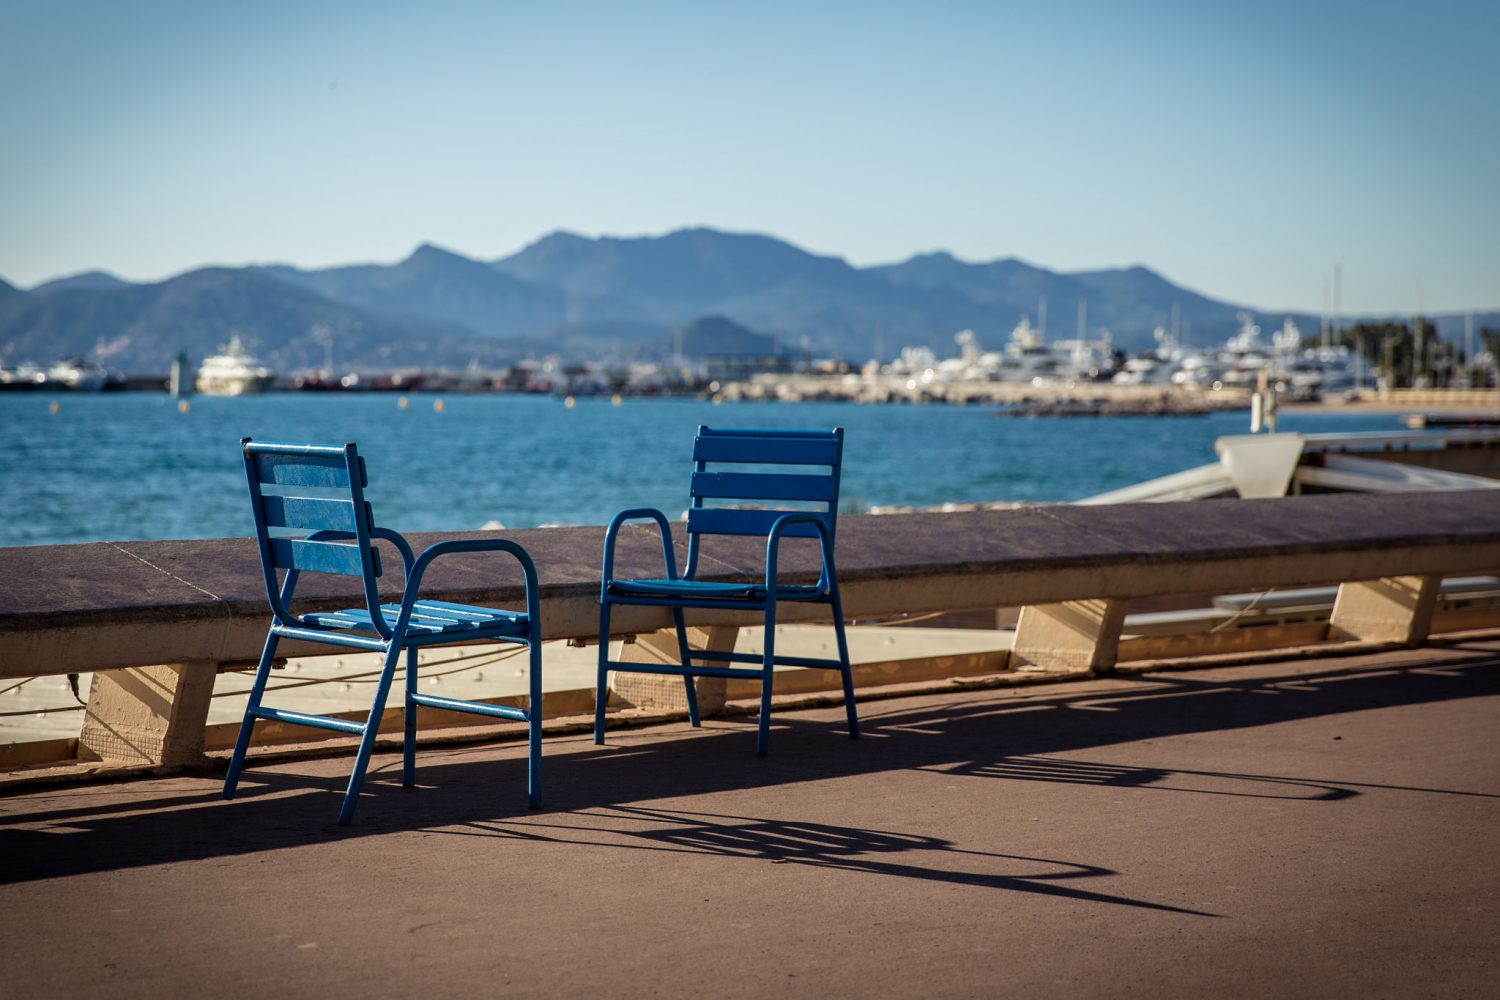 The Ultimate Guide of Things to Do and See in Cannes (With Photos)